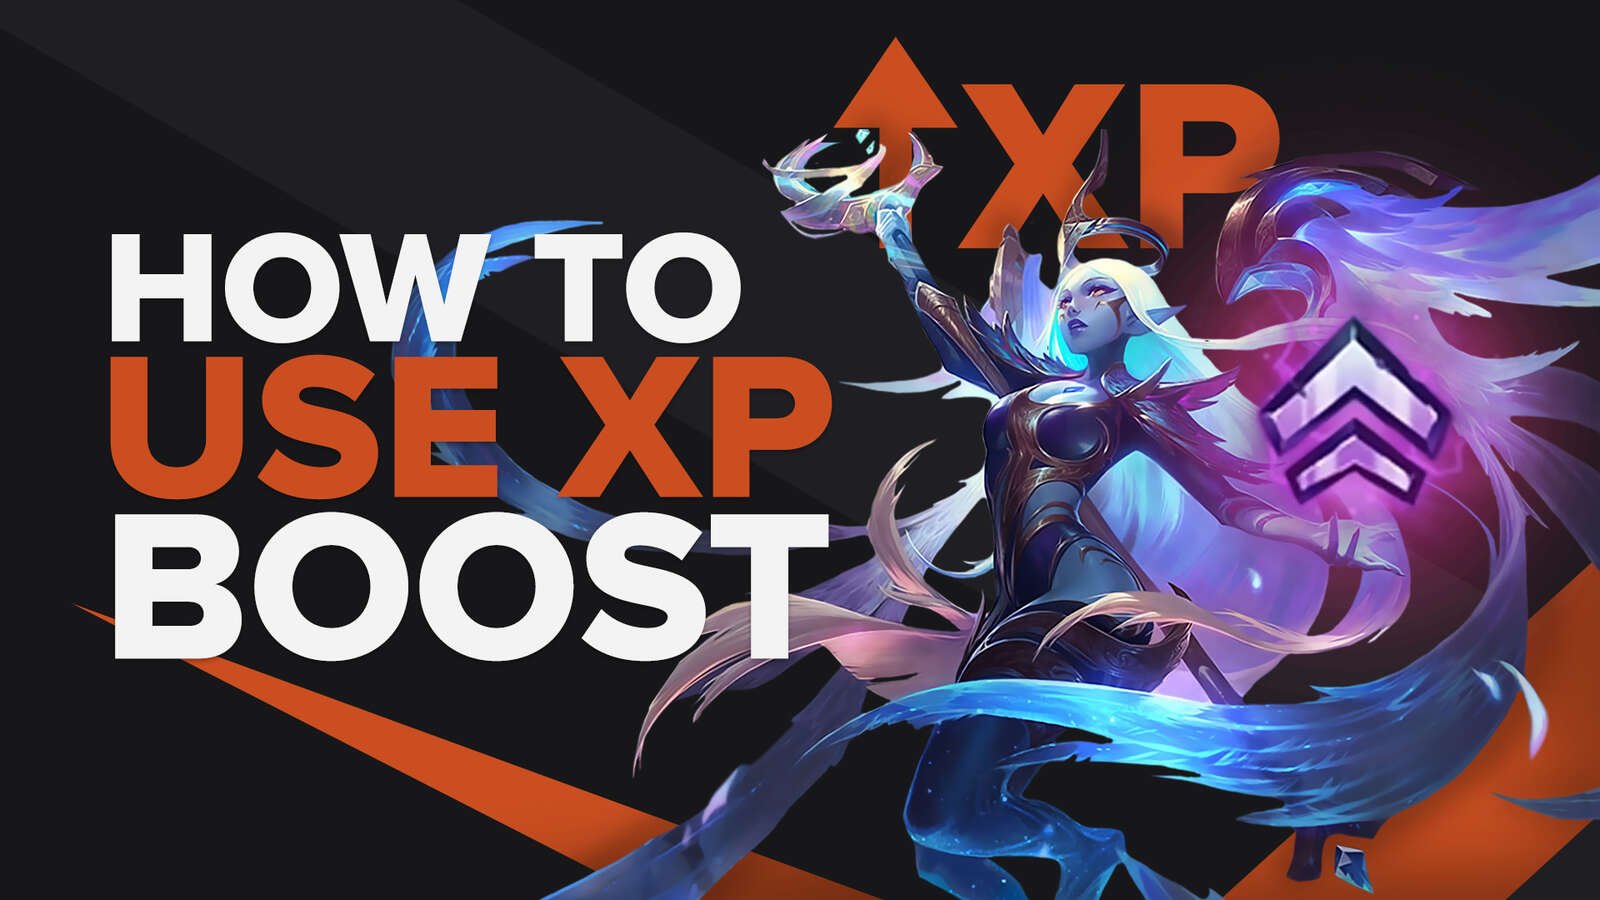 How To Use XP Boost in League of legends